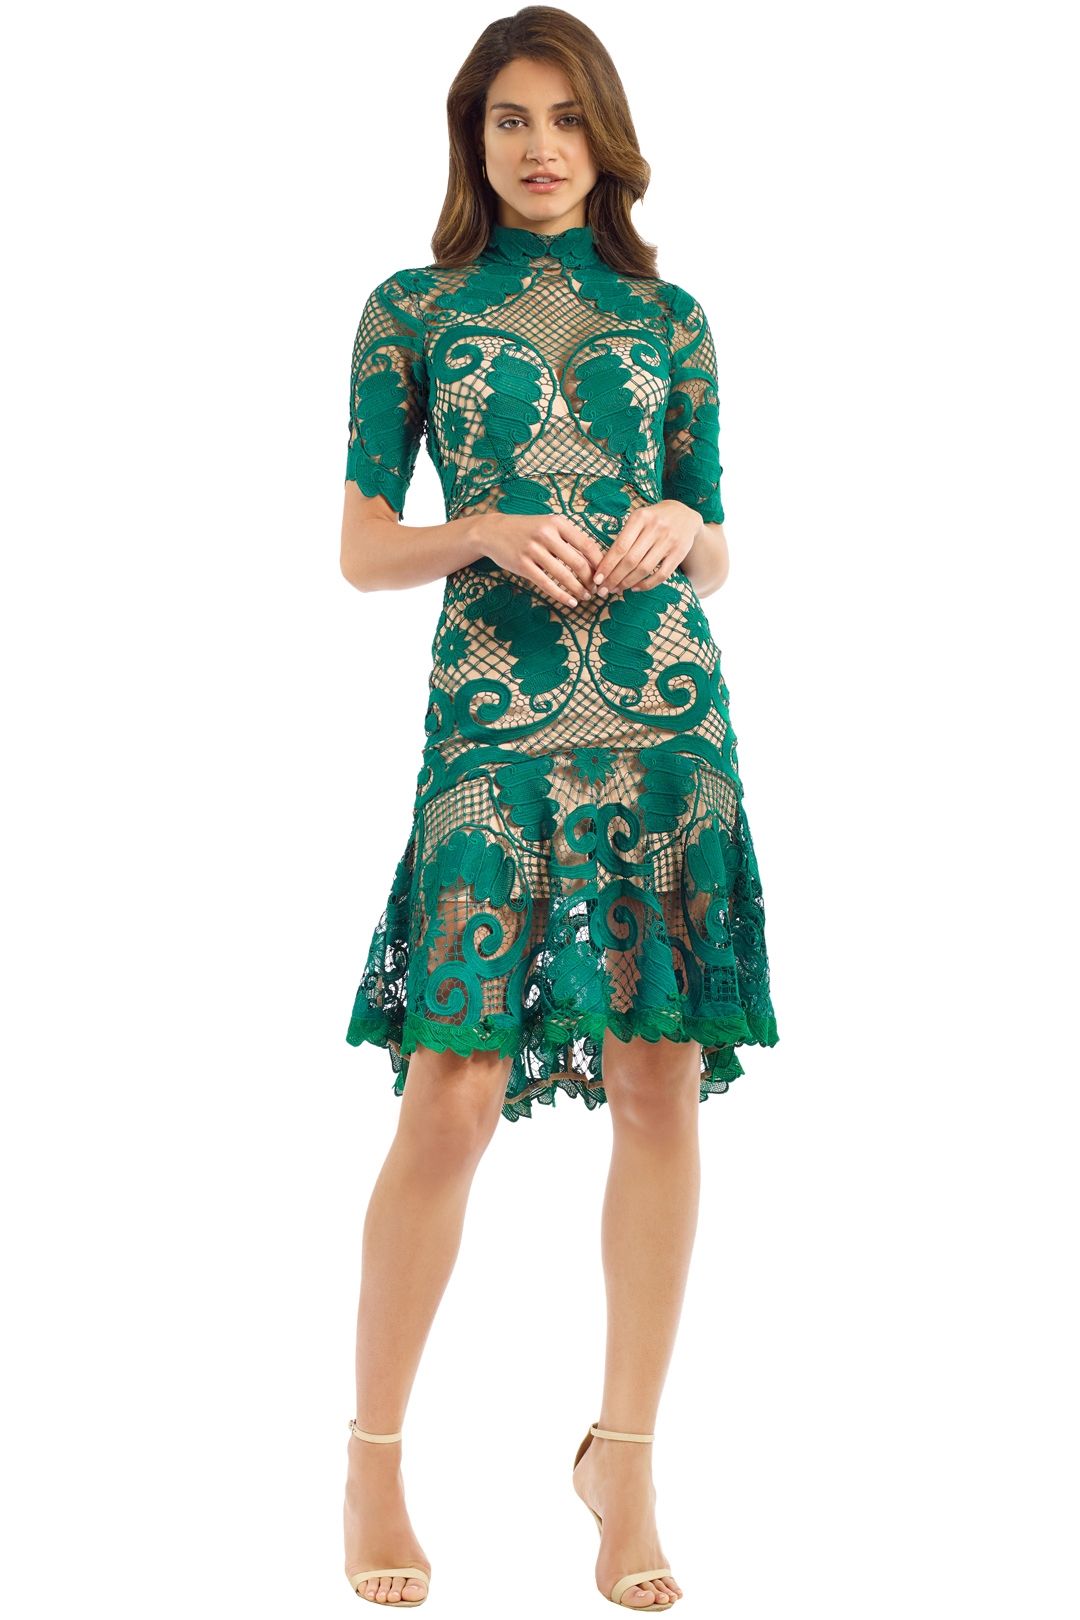 Babylon Lace Dress in Emerald by ...